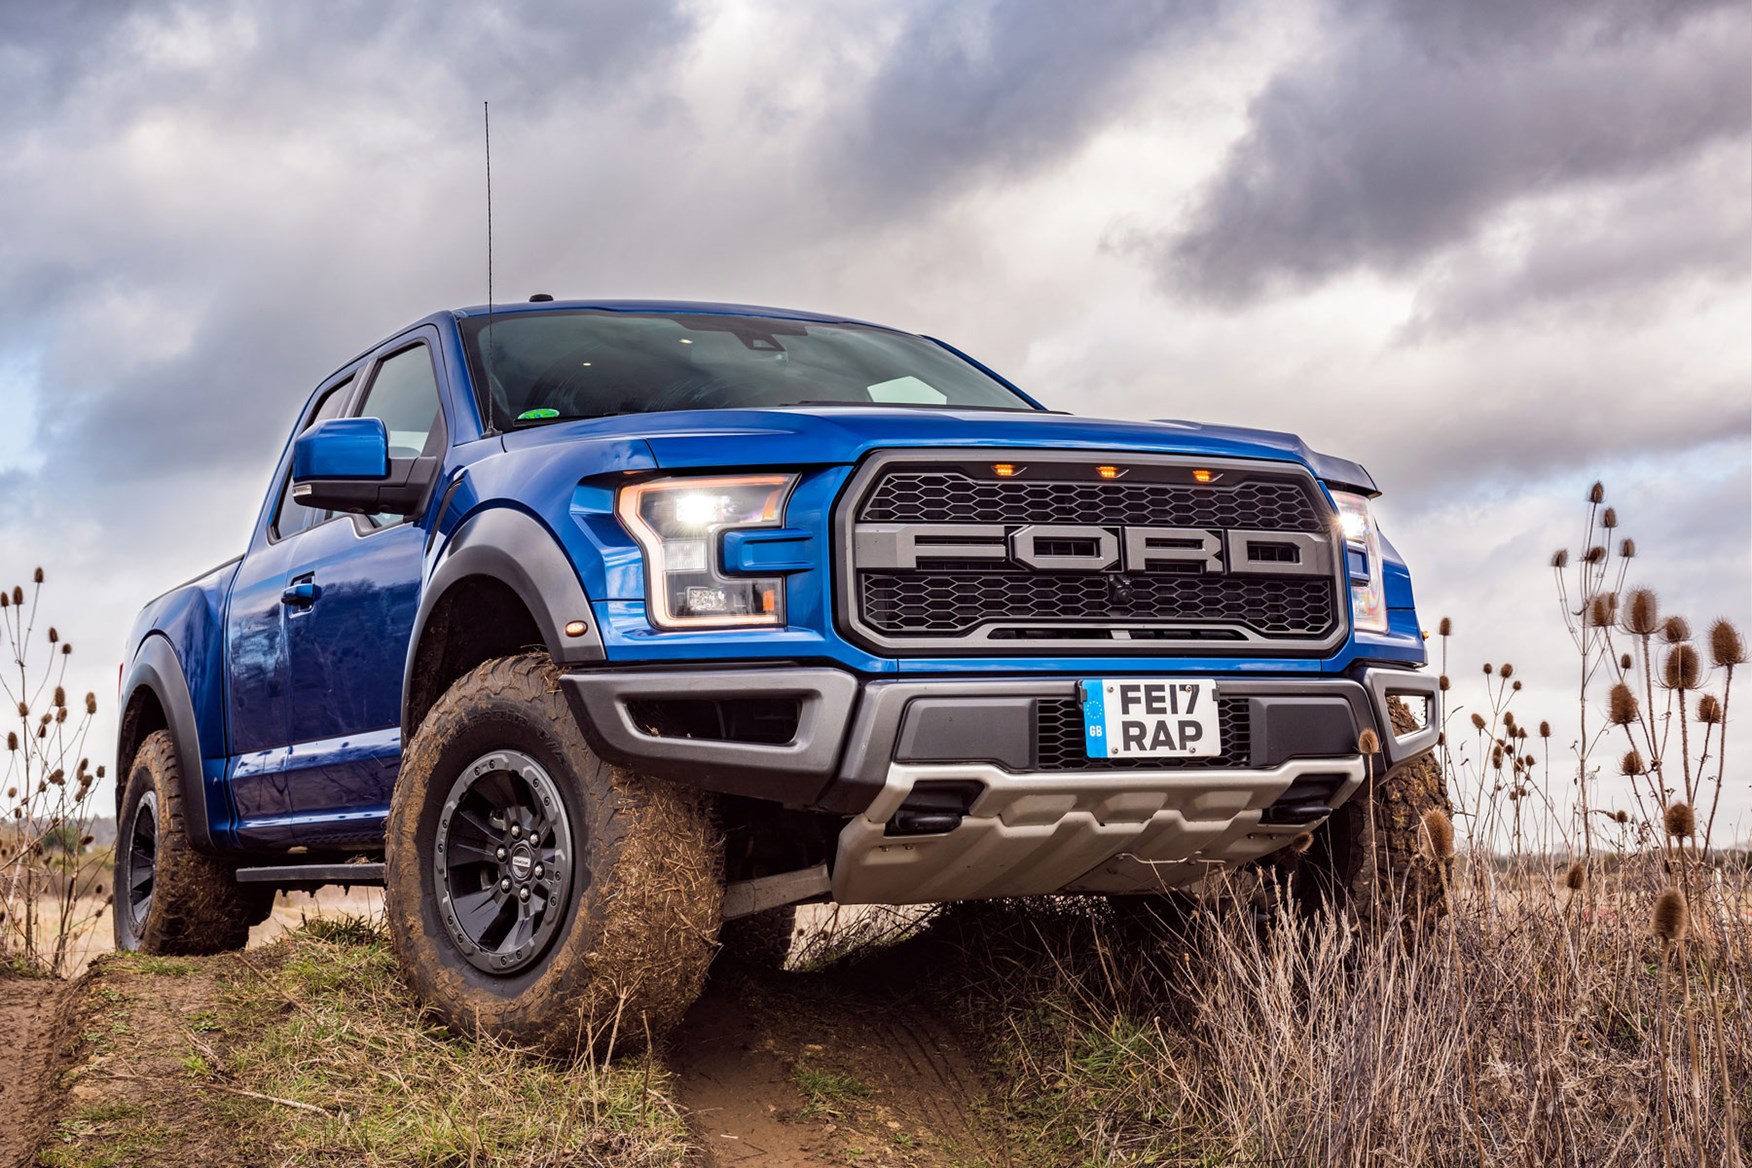 Ford F-150 Raptor review - taking high-performance pickups to another